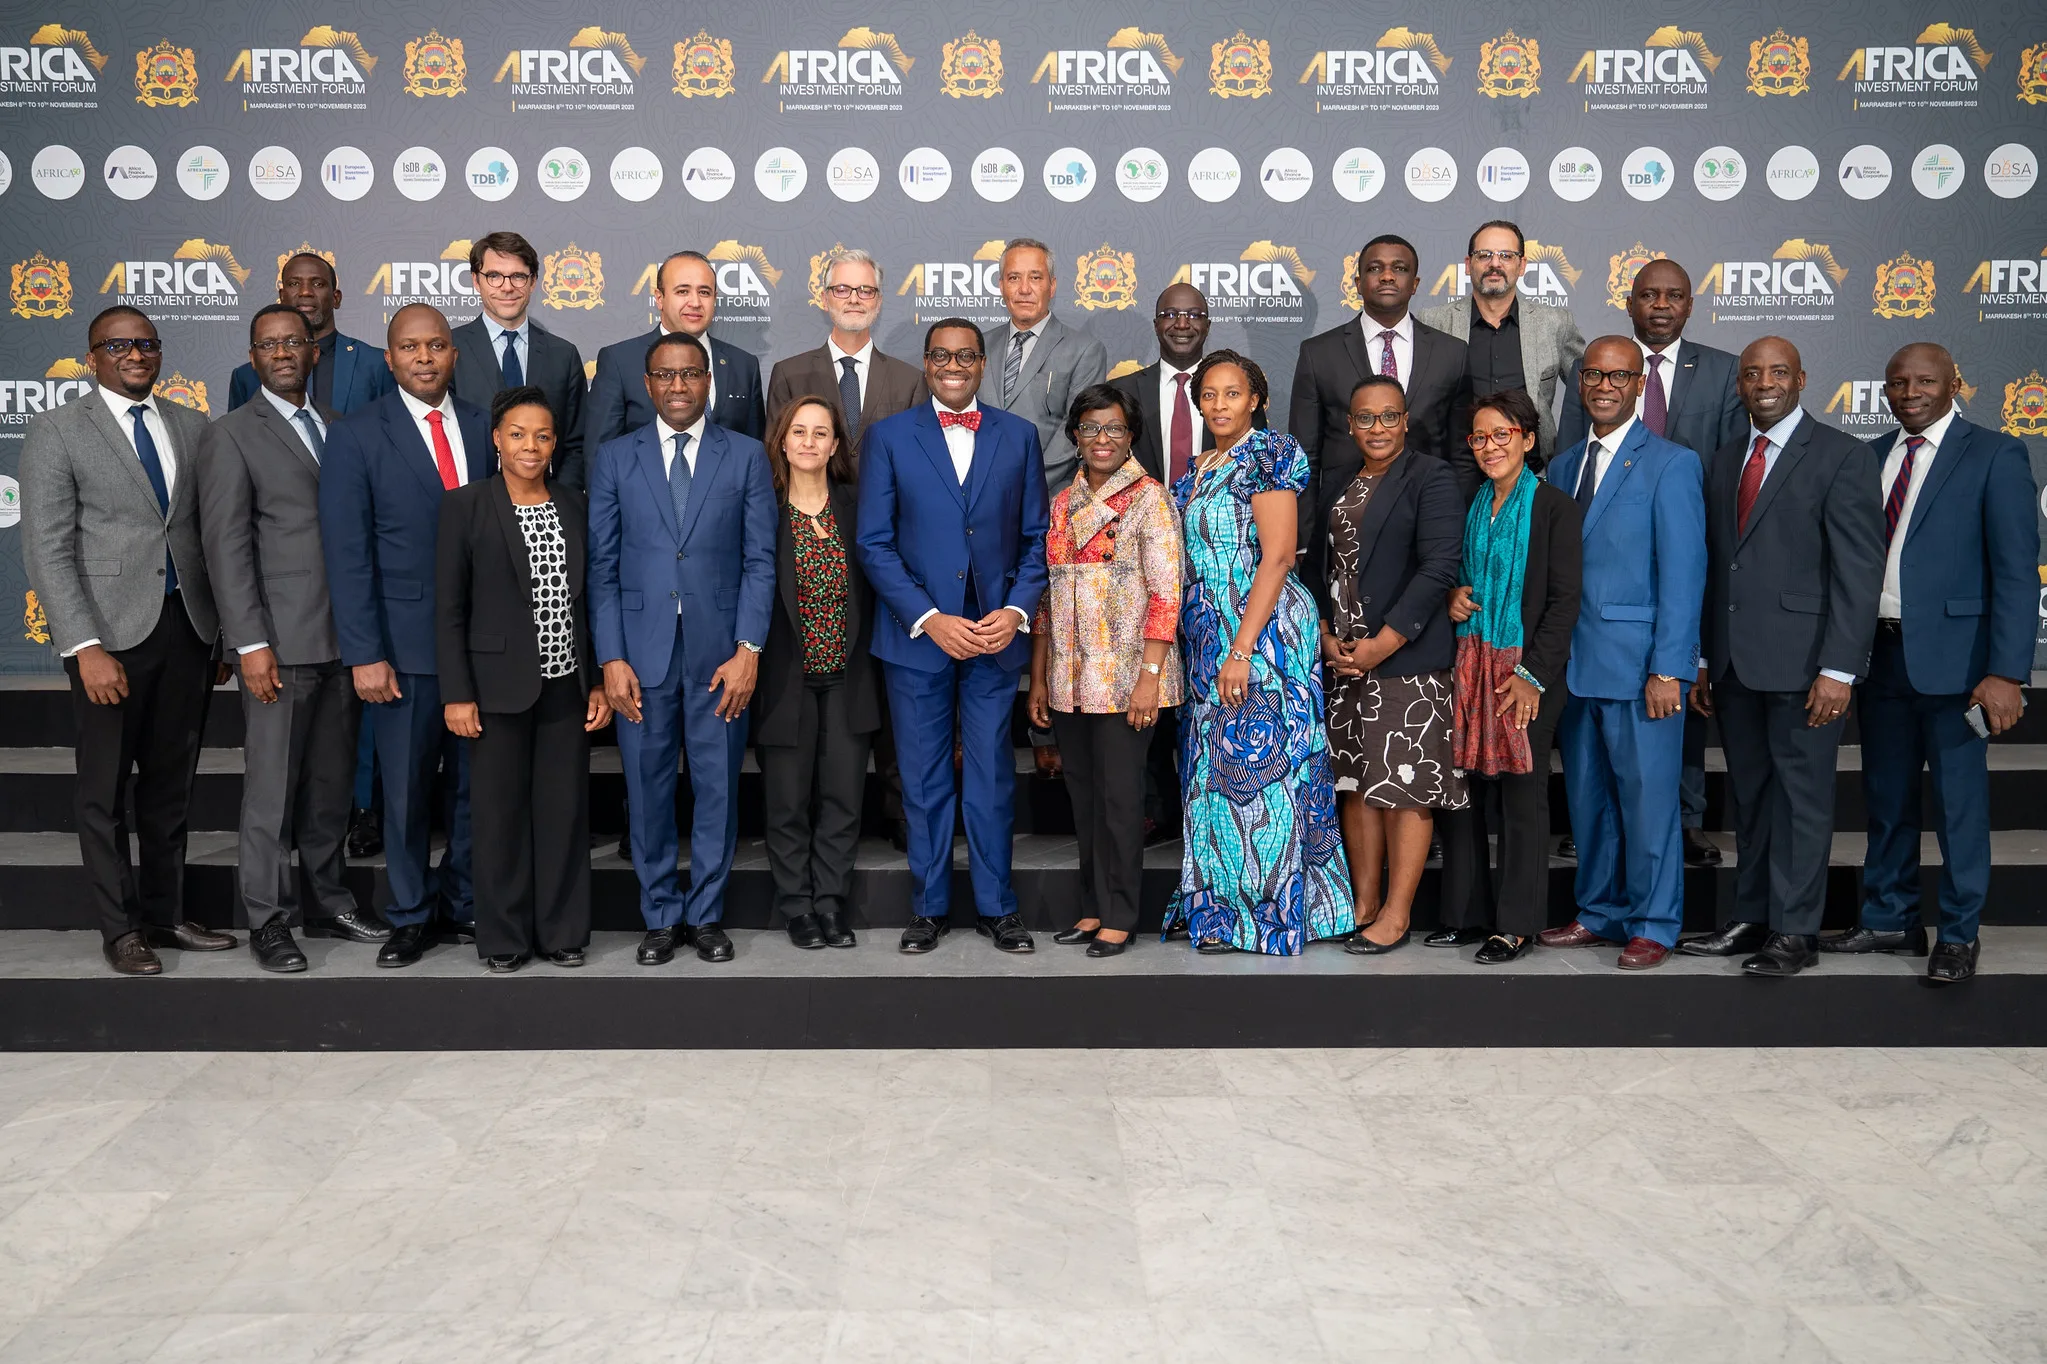 Africa Investment Forum secures $34.82bn of investment interests